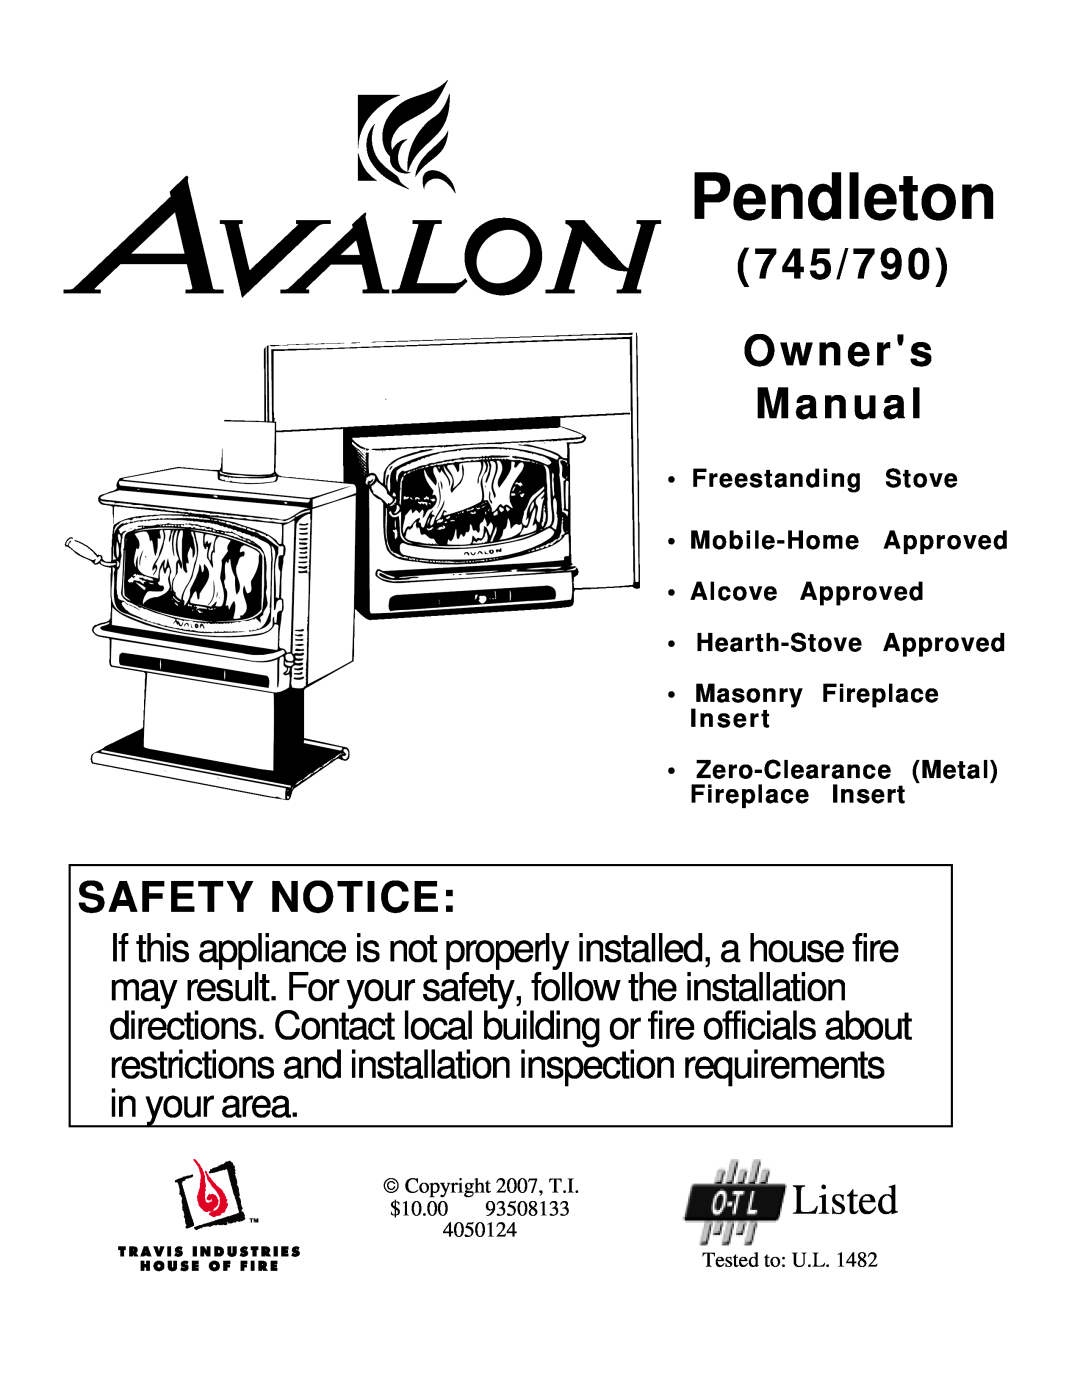 Avalon Stoves 745, 790 owner manual Pendleton, 7 4 5 / 7 9 O w n e r s M a n u a l, Safety Notice, Listed 